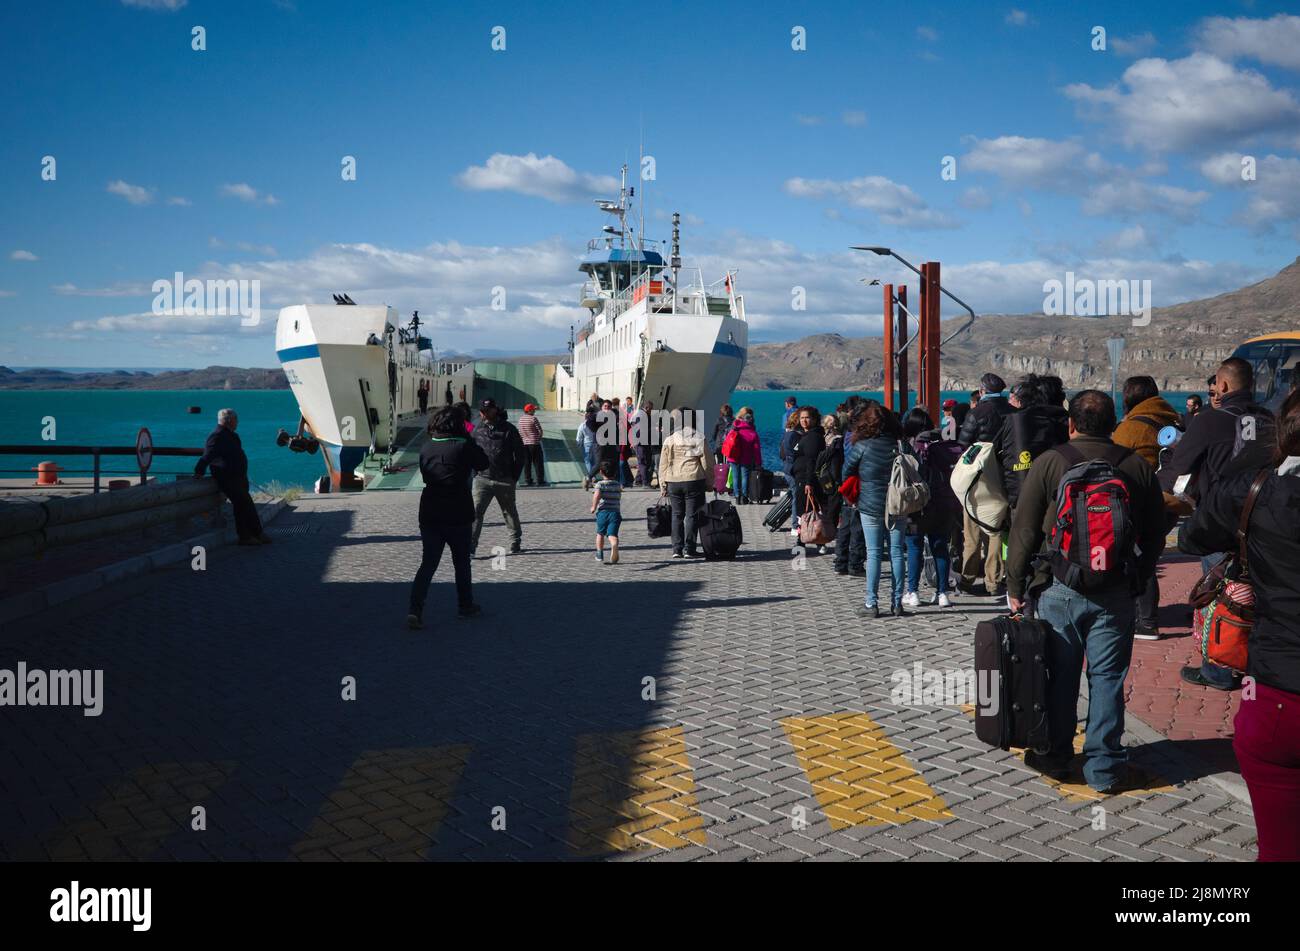 Puerto Ibanez, Chile - March, 2020: Boarding queue to ferry from Puerto Ibanez to Chile Chico on General Carrera lake. Passengers  with suitcases wait Stock Photo